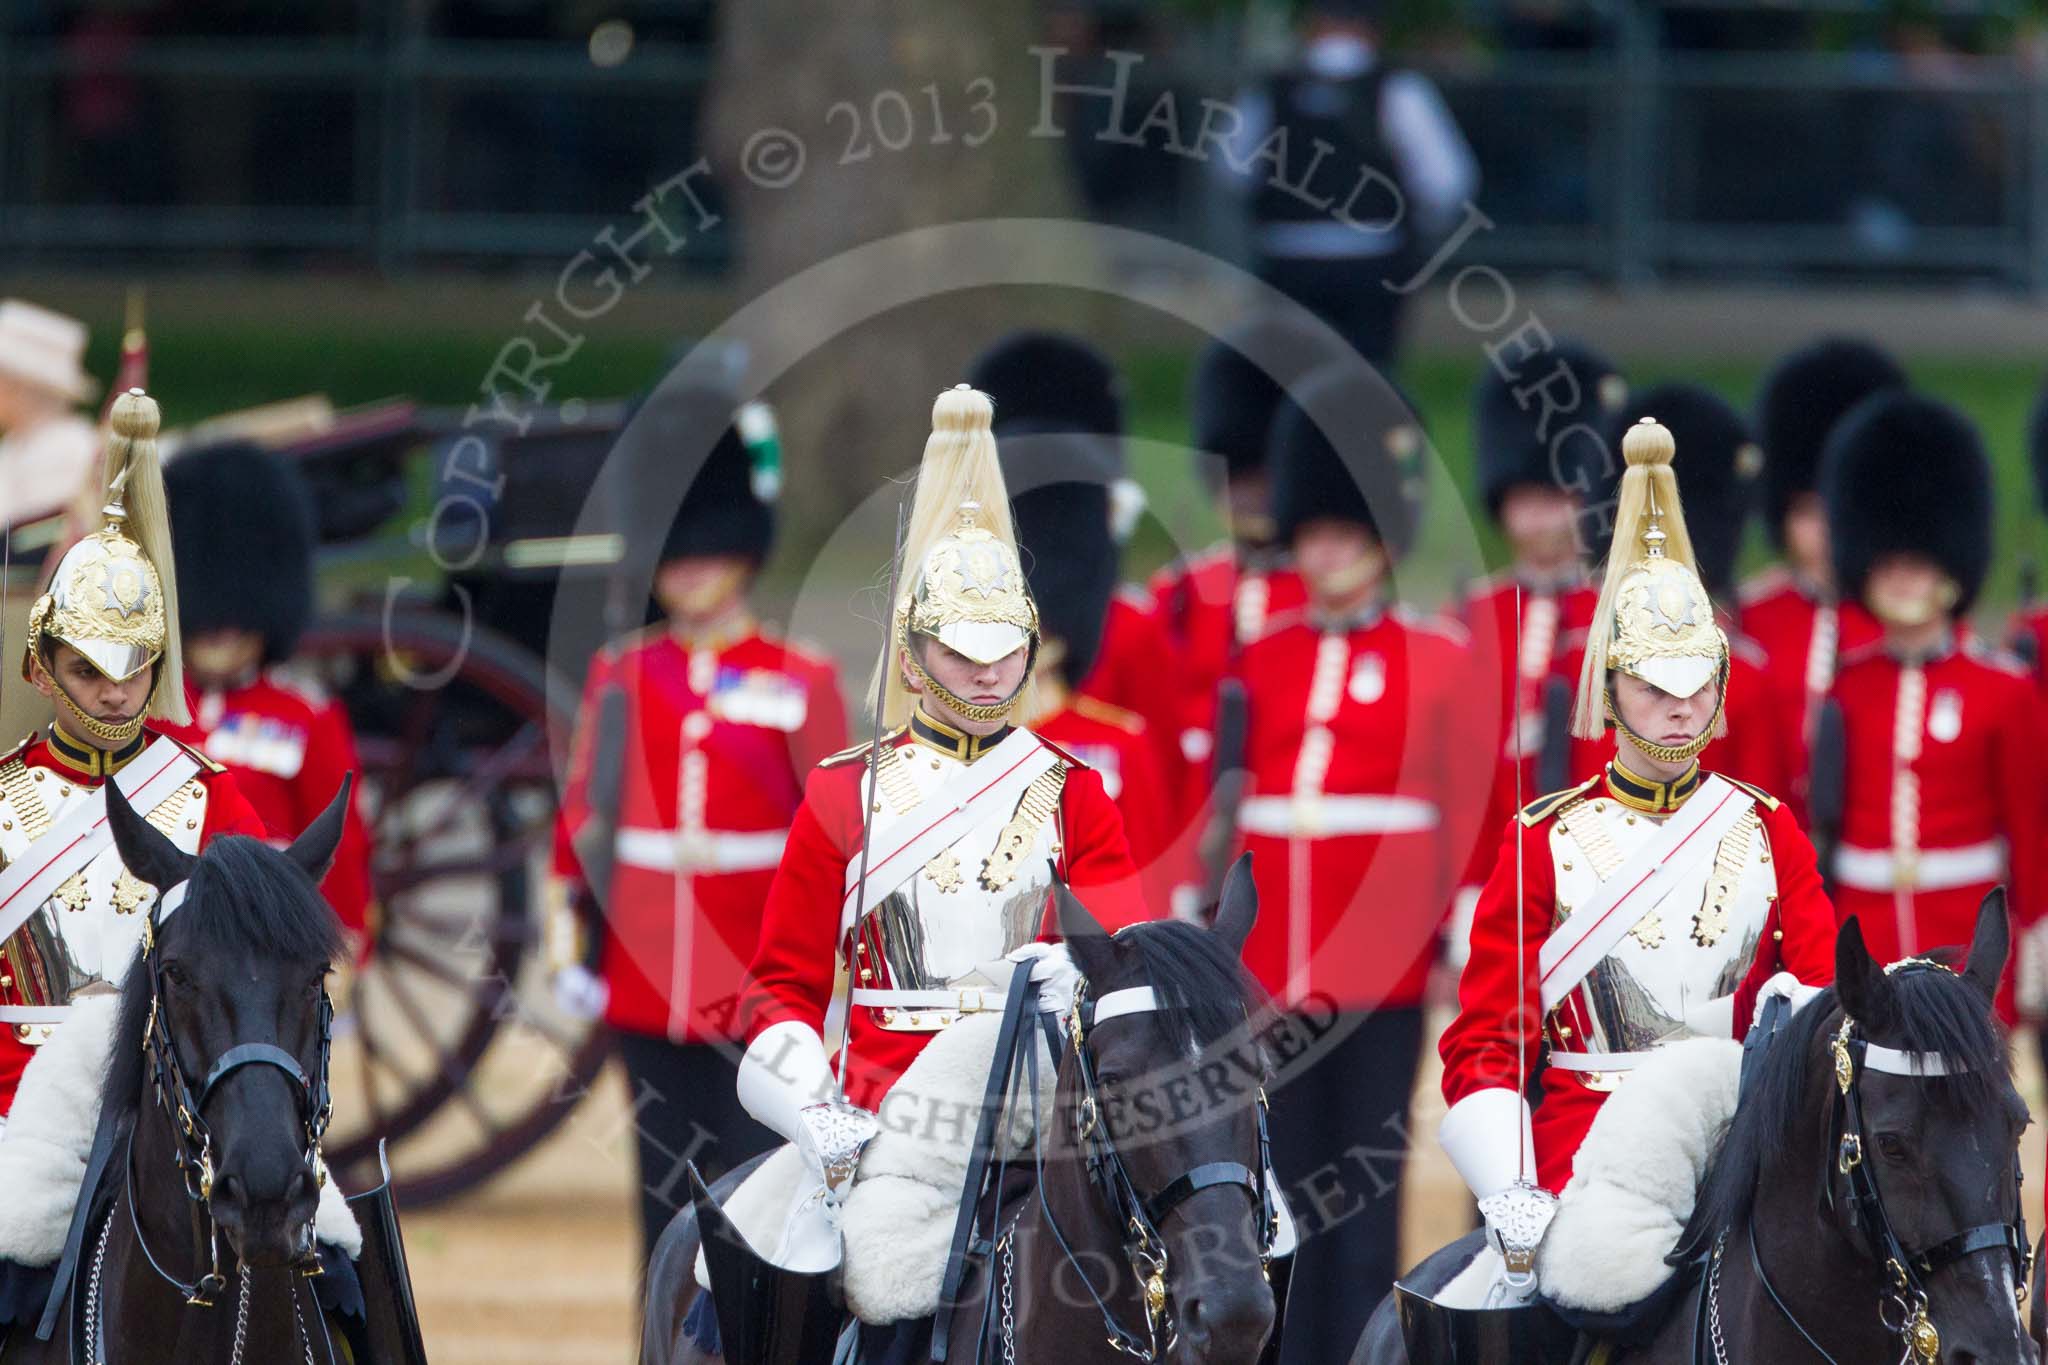 Trooping the Colour 2015. Image #291, 13 June 2015 11:04 Horse Guards Parade, London, UK